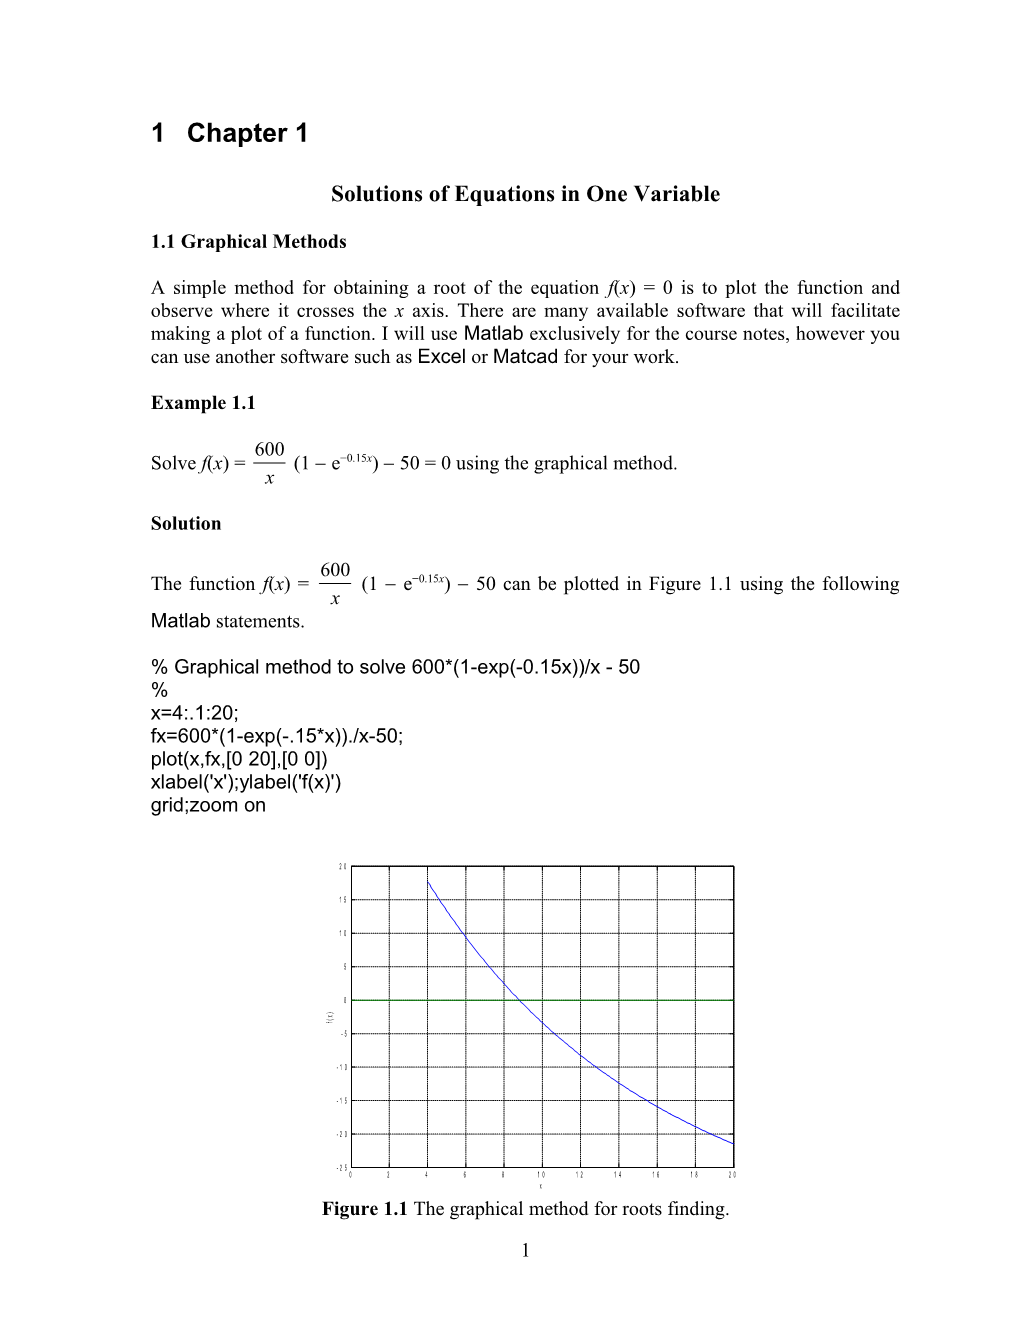 Solutions of Equations in One Variable